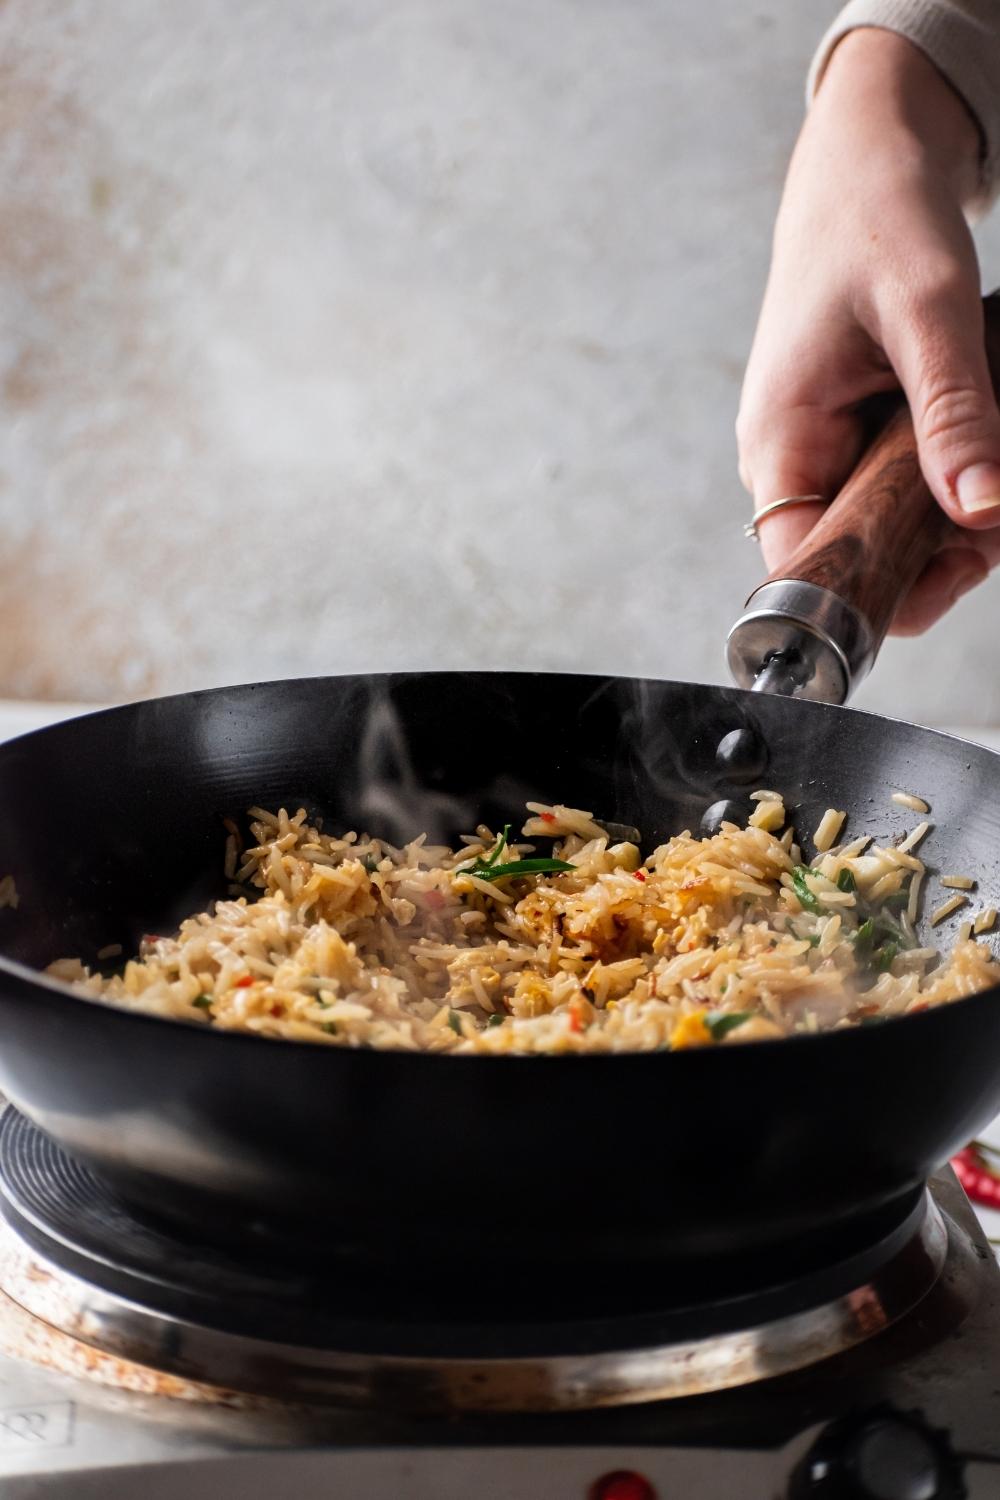 A hand holding the handle of a wok that is filled with egg fried rice.